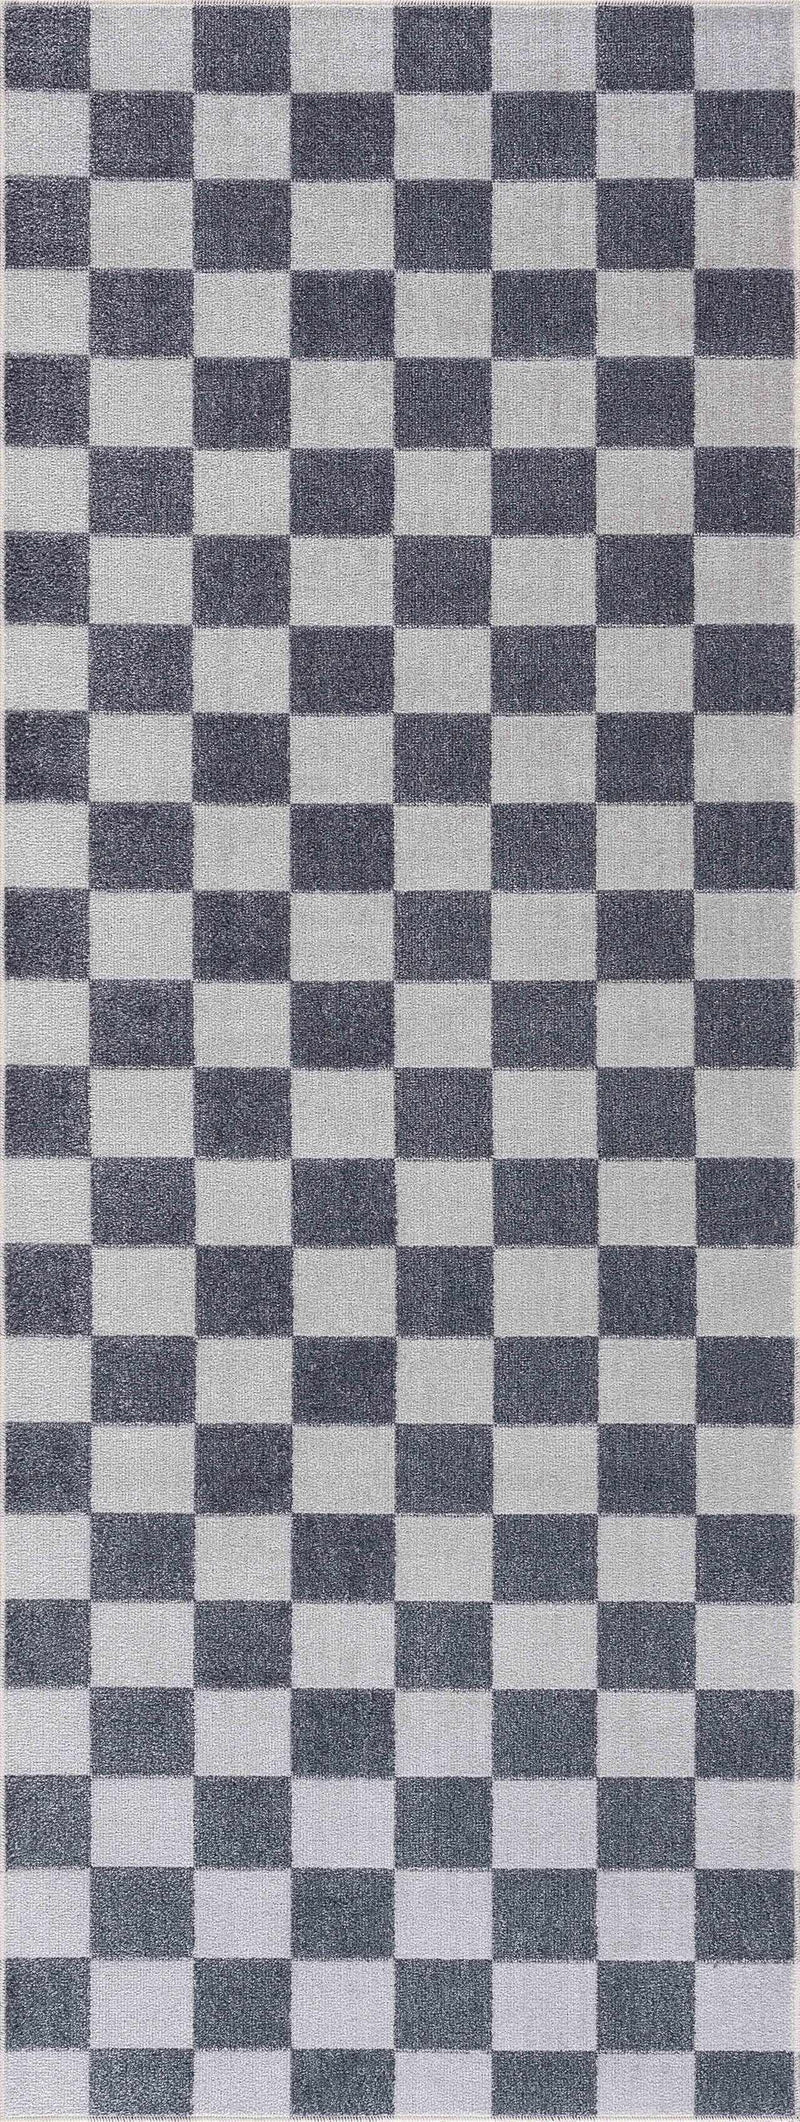 Alie Gray Checkered Washable Area Rug Rugs Boutique Rugs 2'7" x 7'3" Runner 